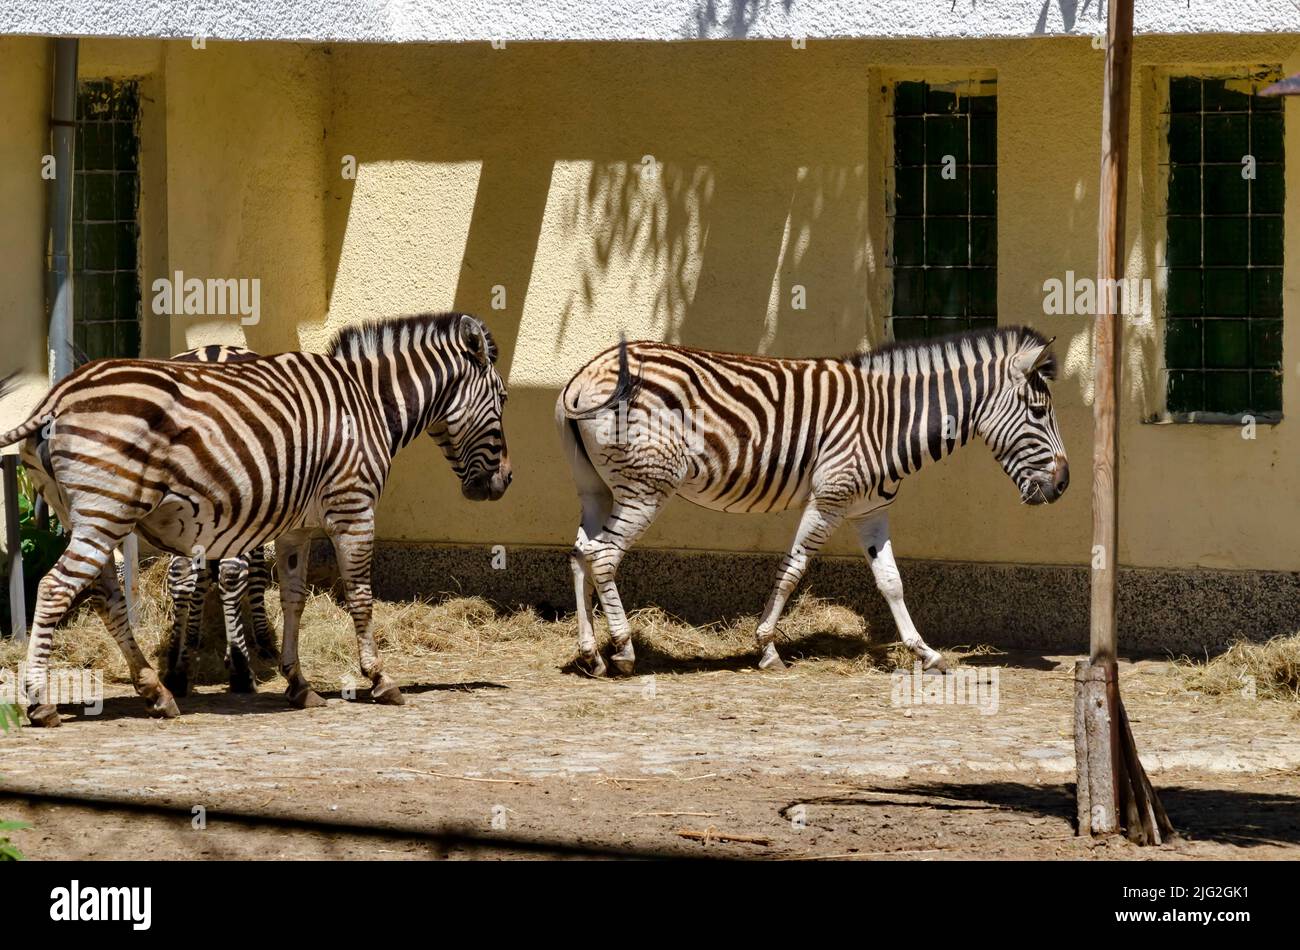 Several zebras feed on hay from an outdoor manger in the yard, Sofia, Bulgaria Stock Photo